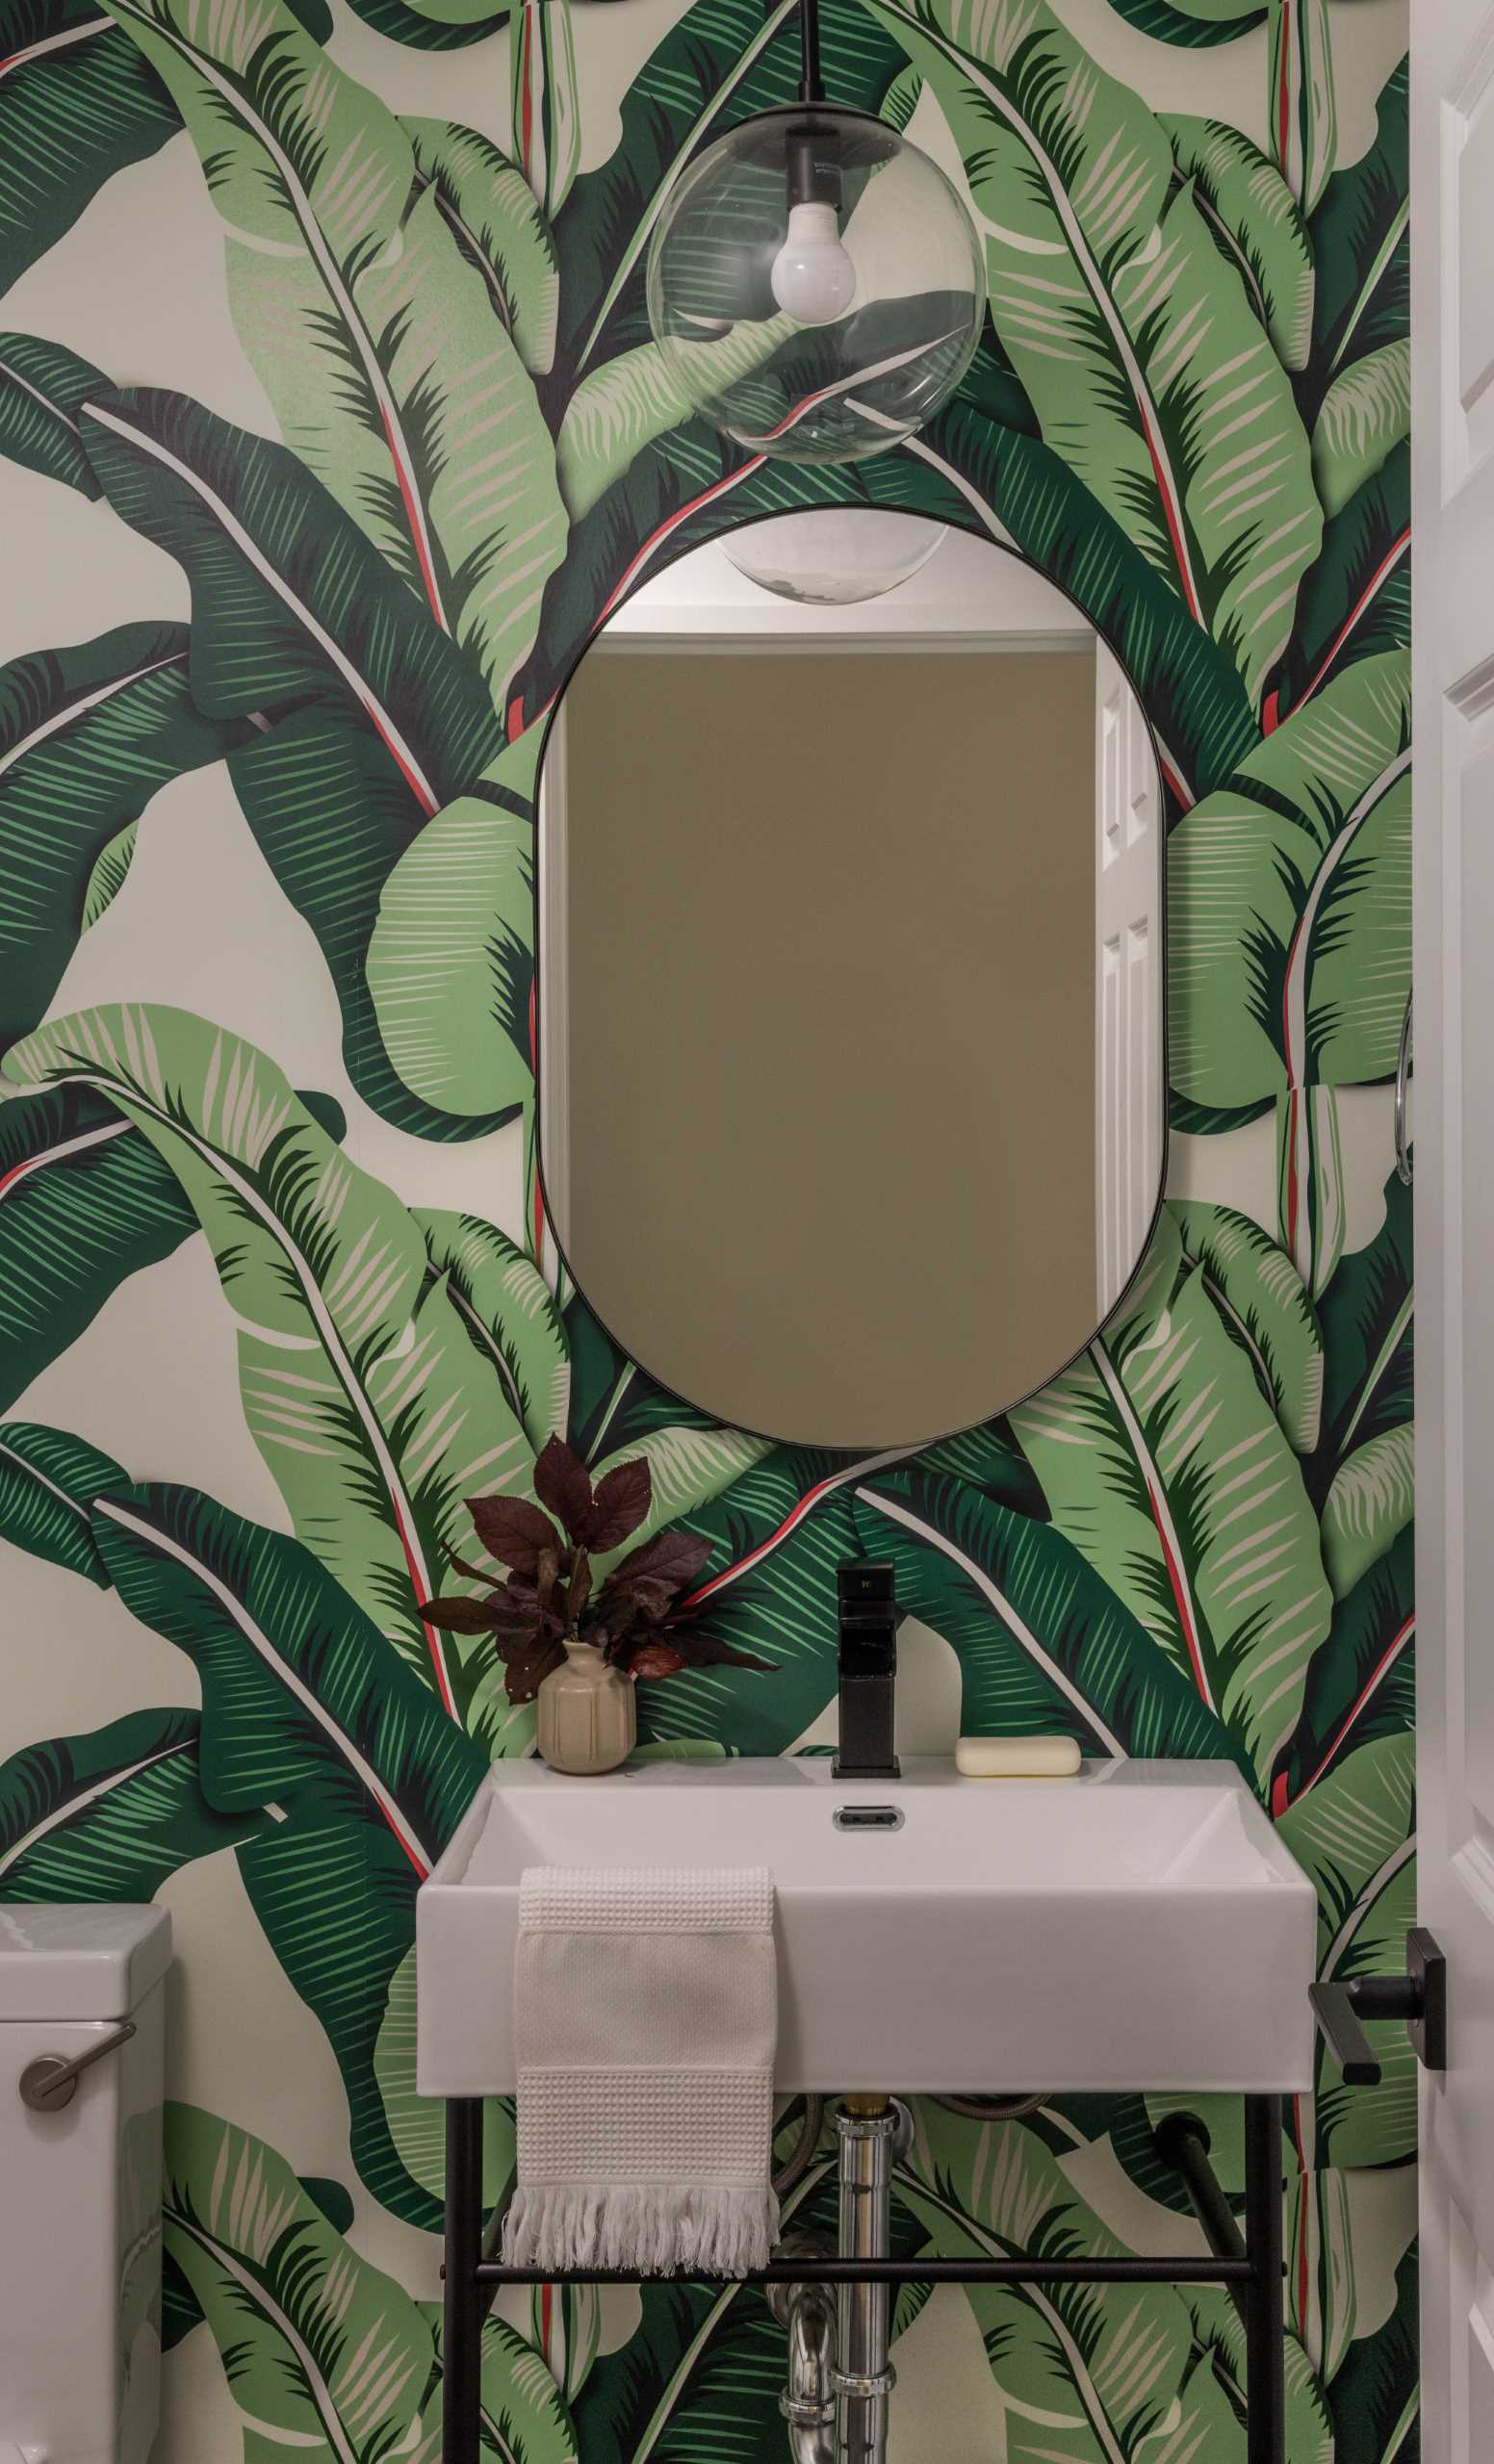 In this powder room, a fun tropical print wallpaper covers the wall adding an unexpected fun element.